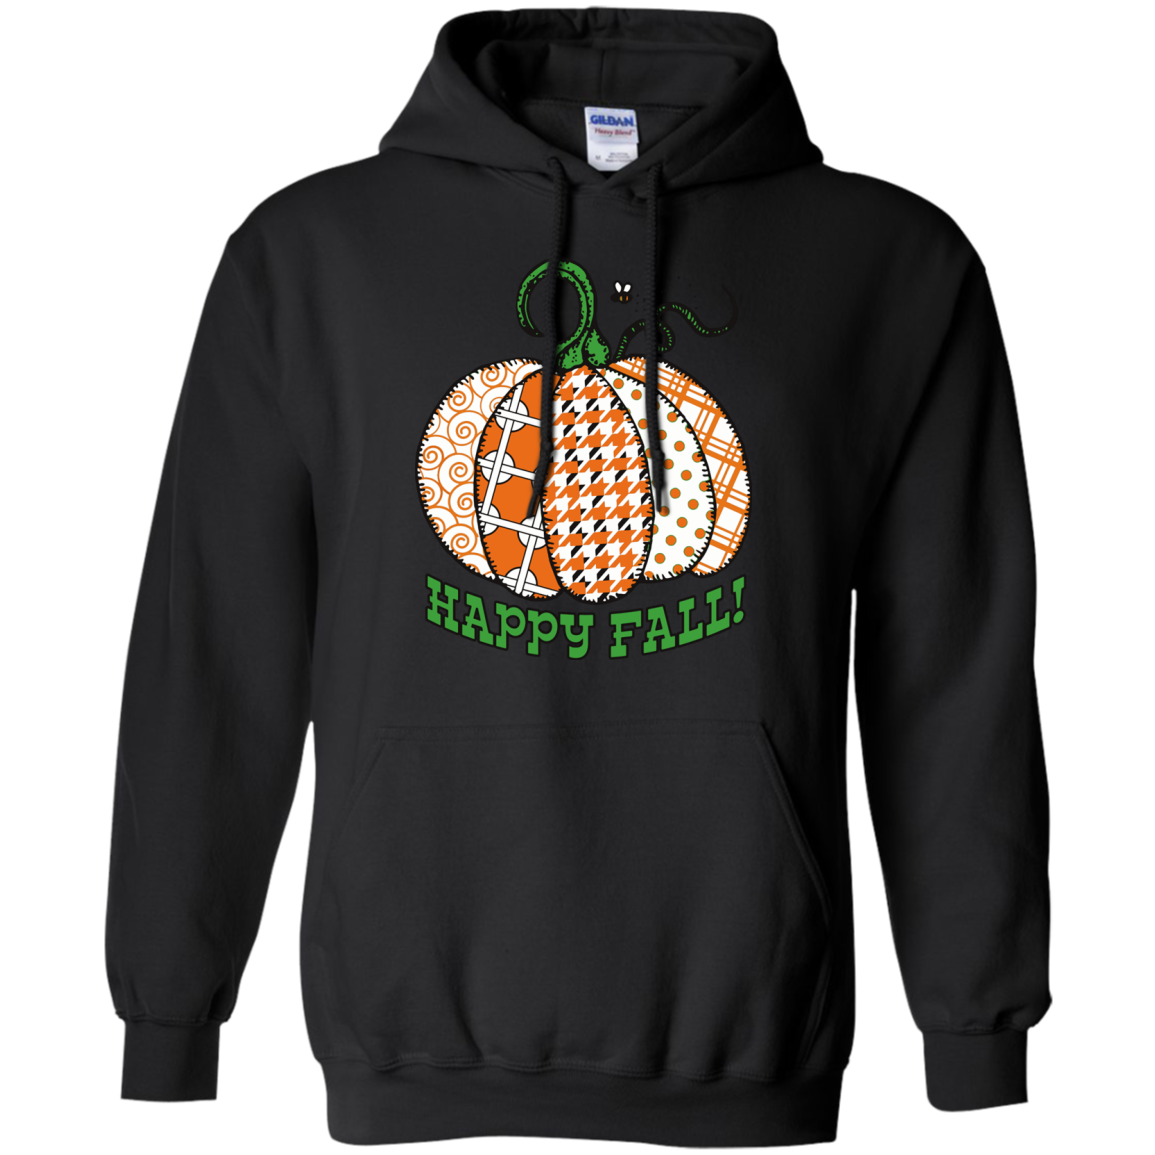 Happy Fall! Pullover Hoodies - Crafter4Life - 4